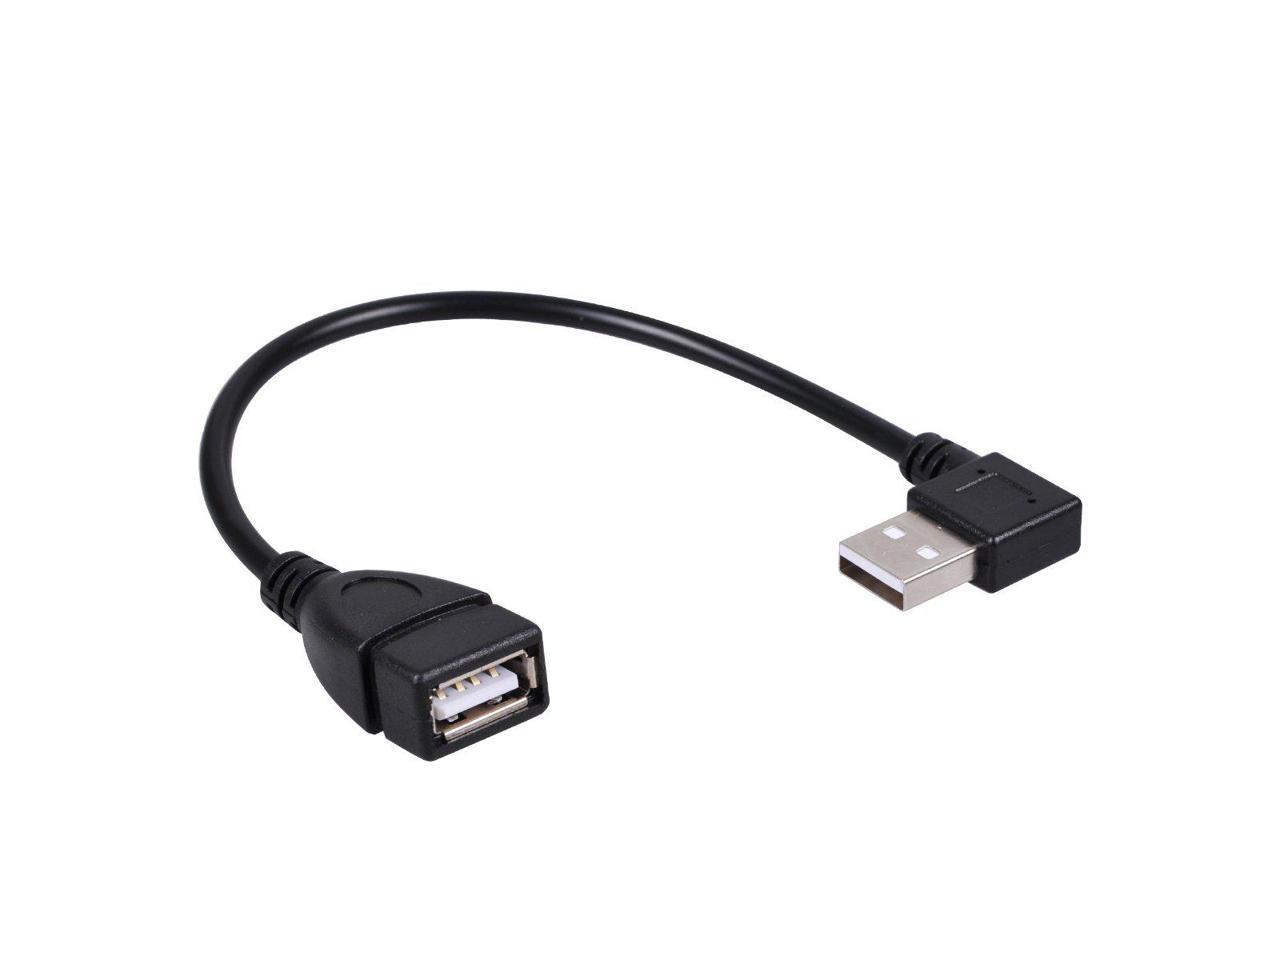 UCEC USB 3.0 Adapter - Type A Female to Female -Connector